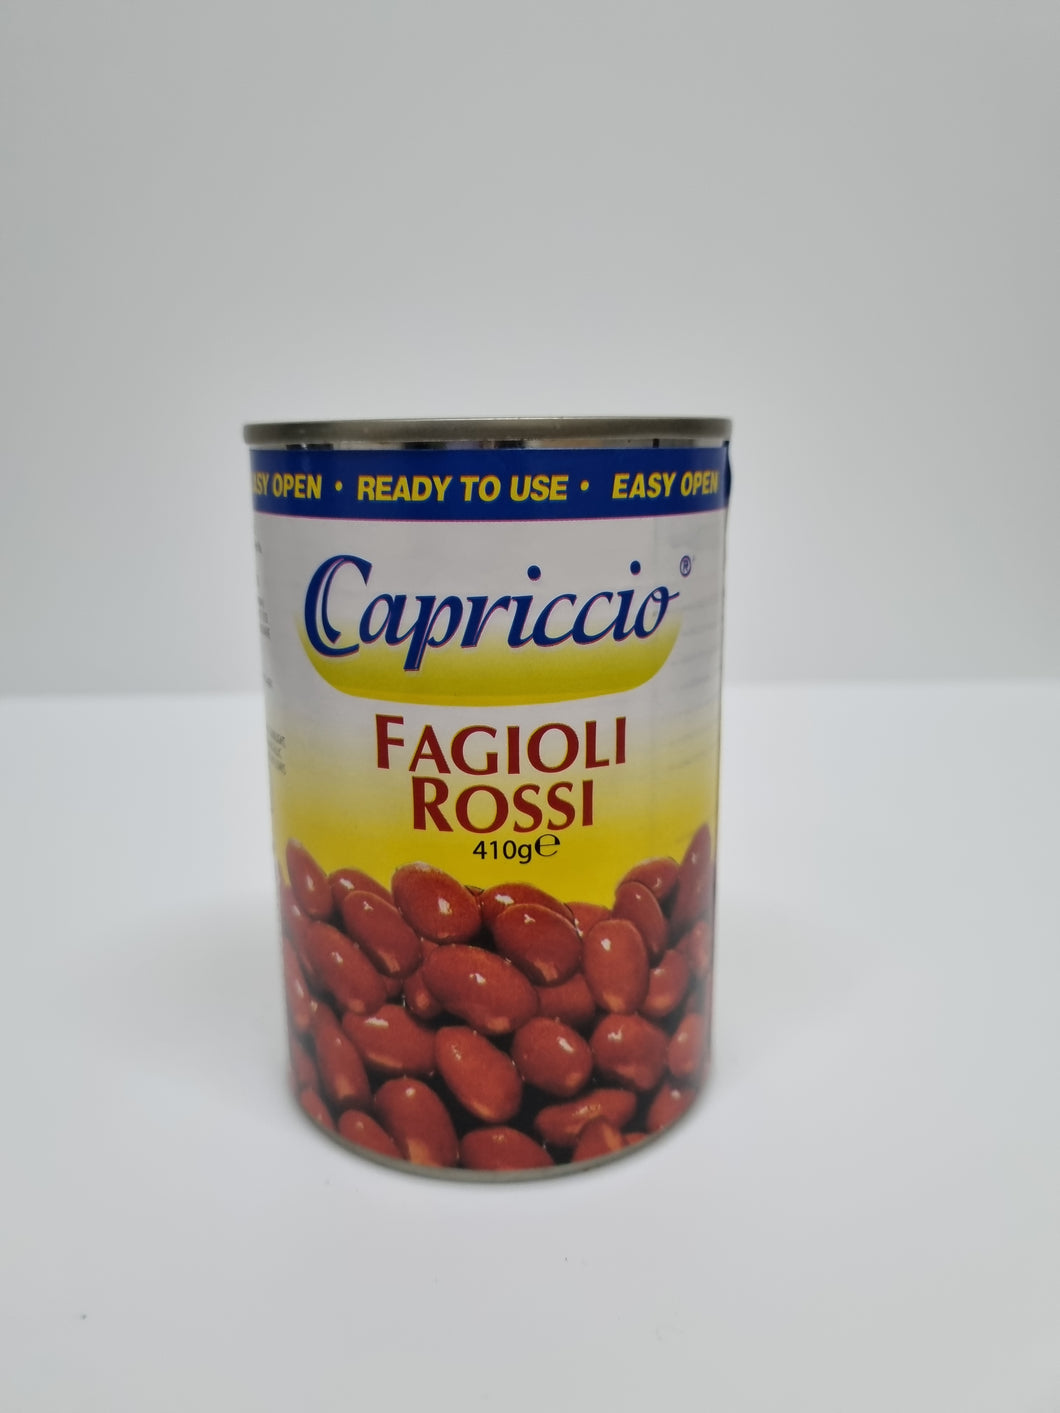 Can- Red kidney beans